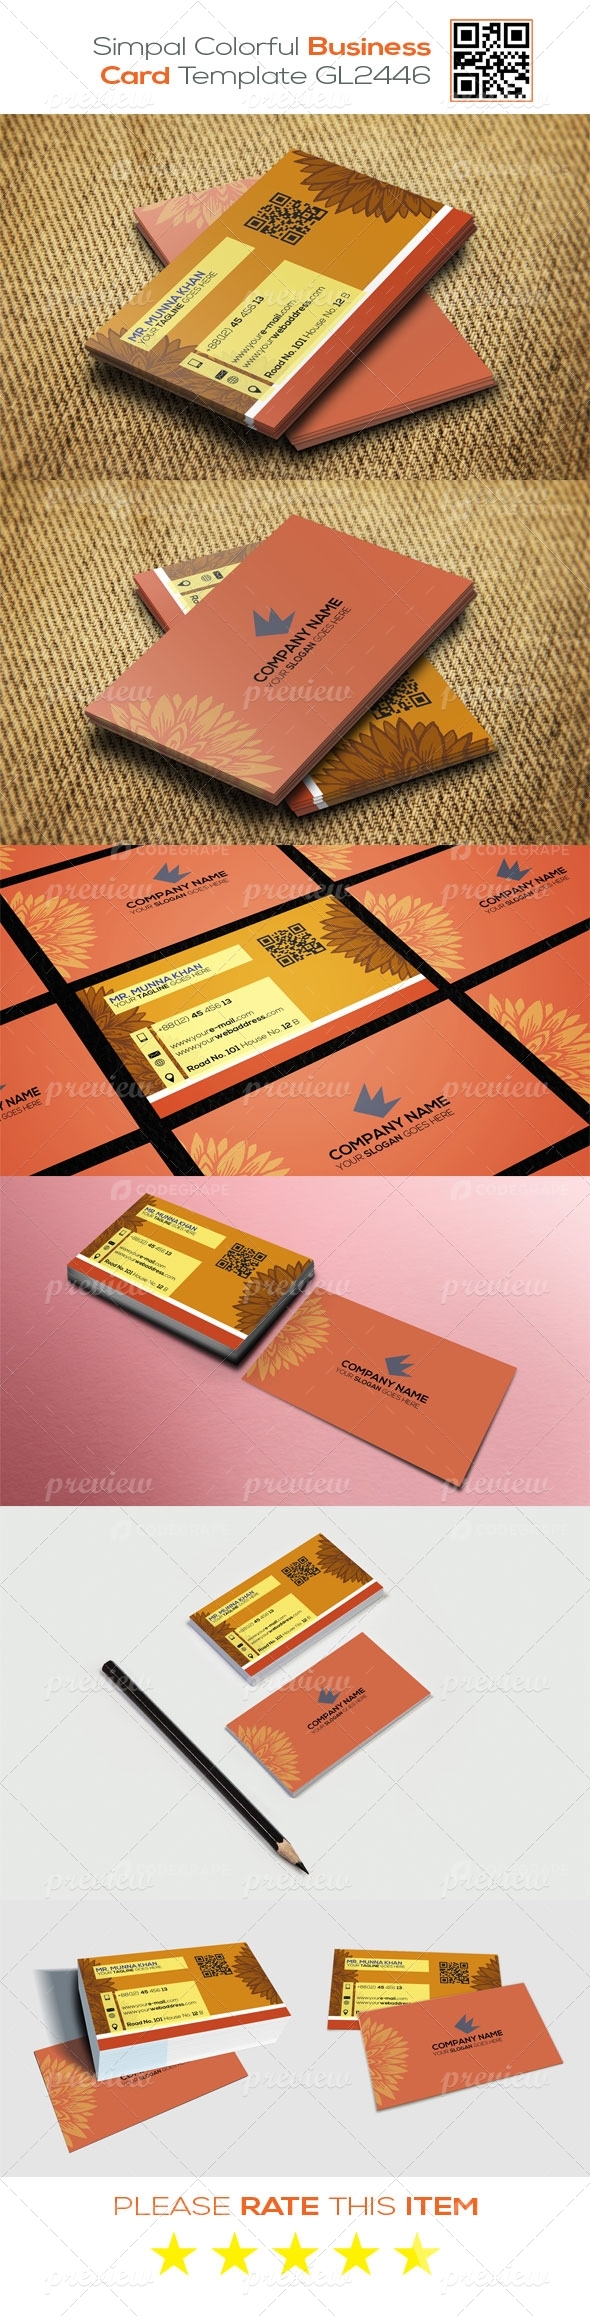 Simpal Colorful Business Card Template GL2446